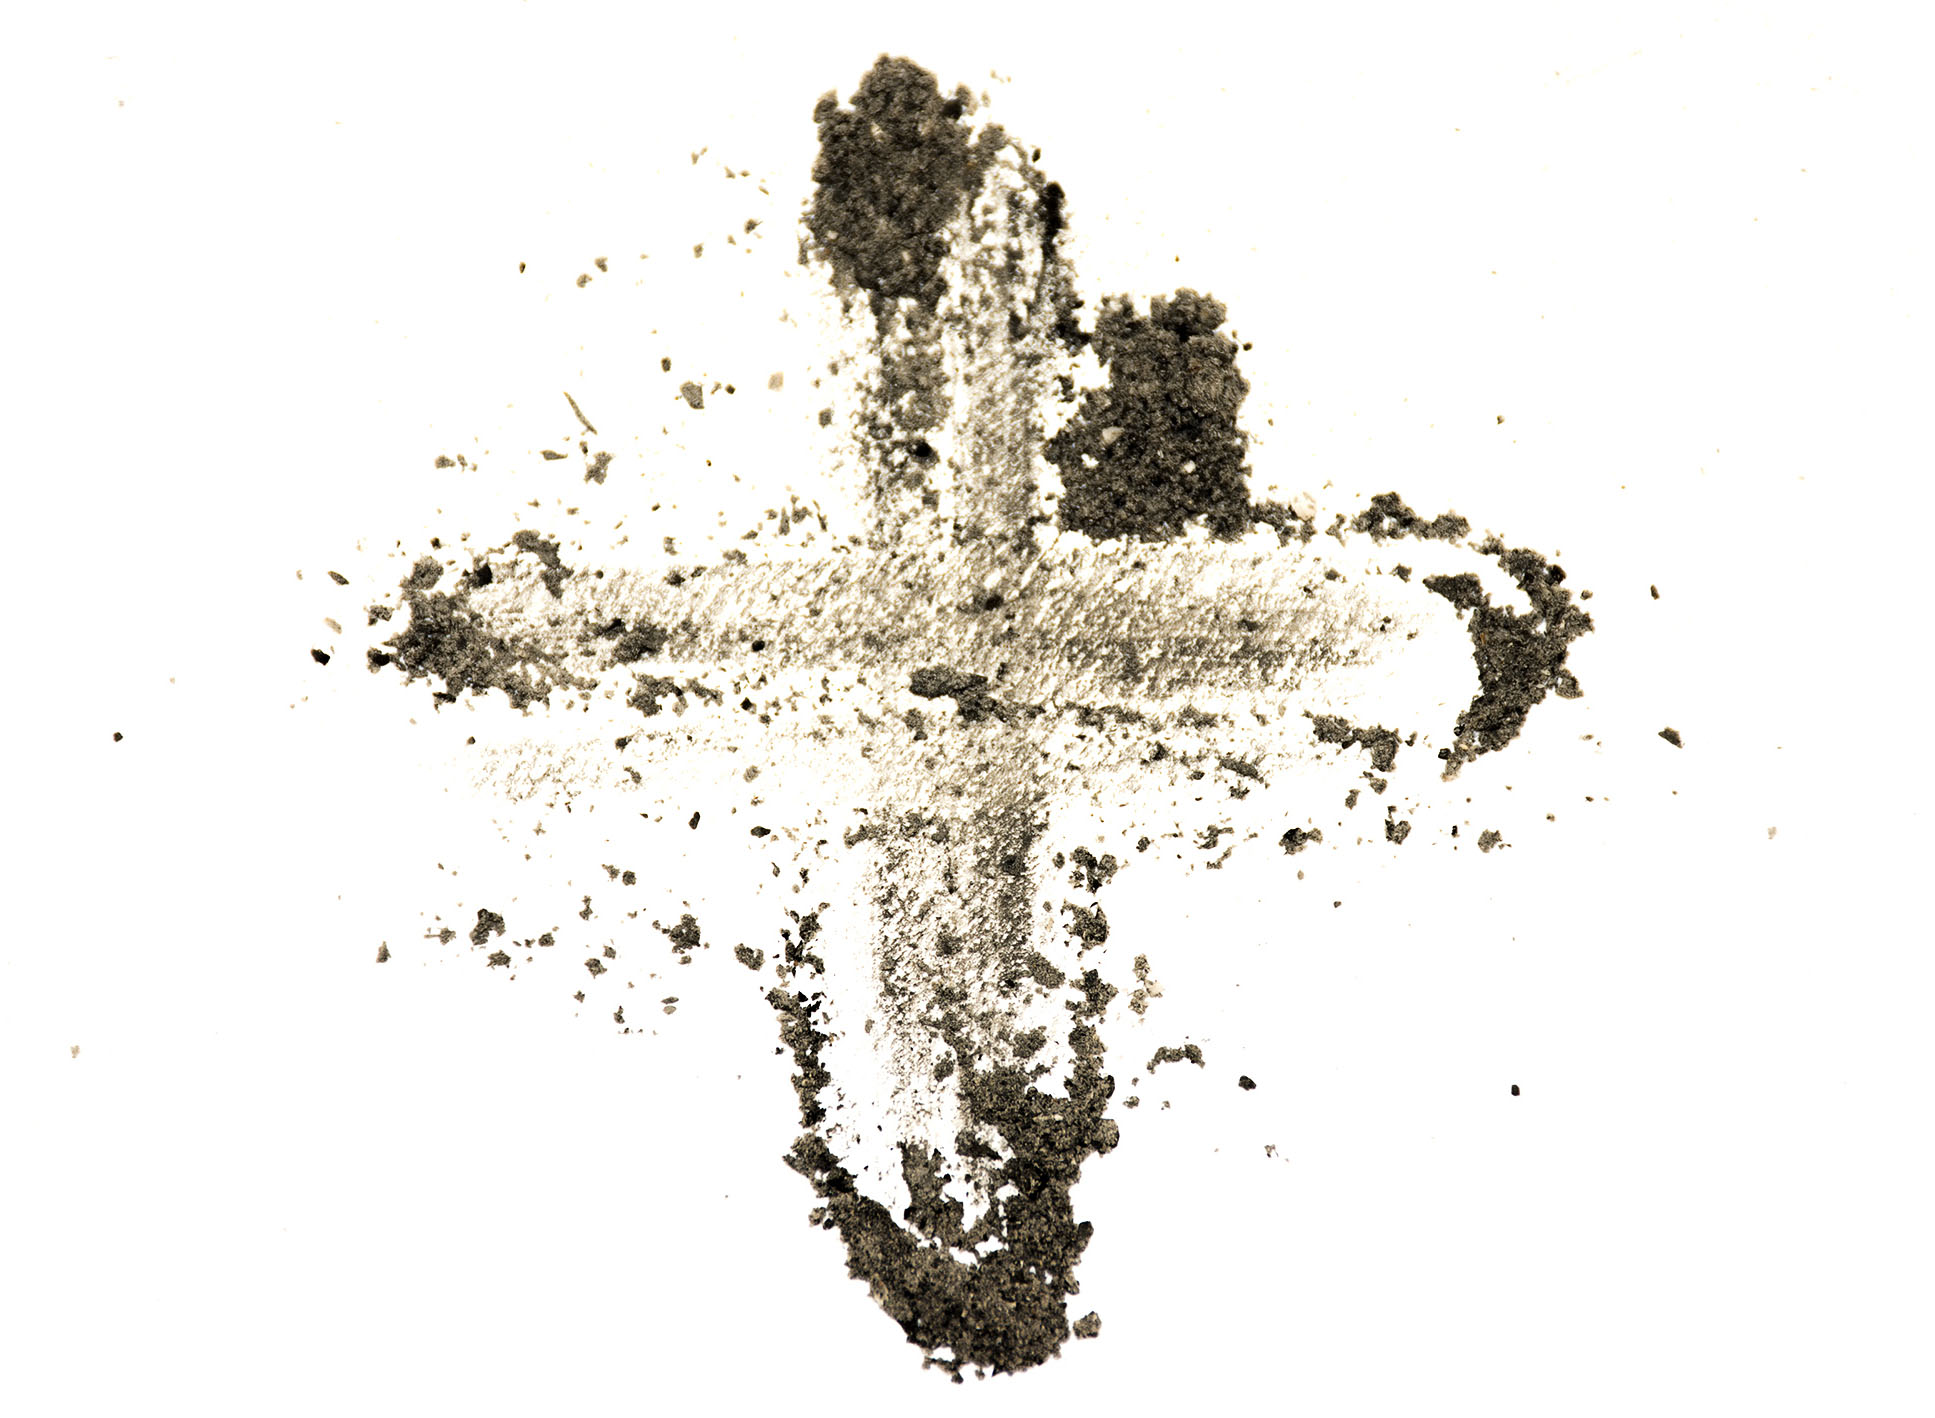 Shrove Tuesday and Ash Wednesday: 9 things to do with your family -  Teaching Catholic Kids